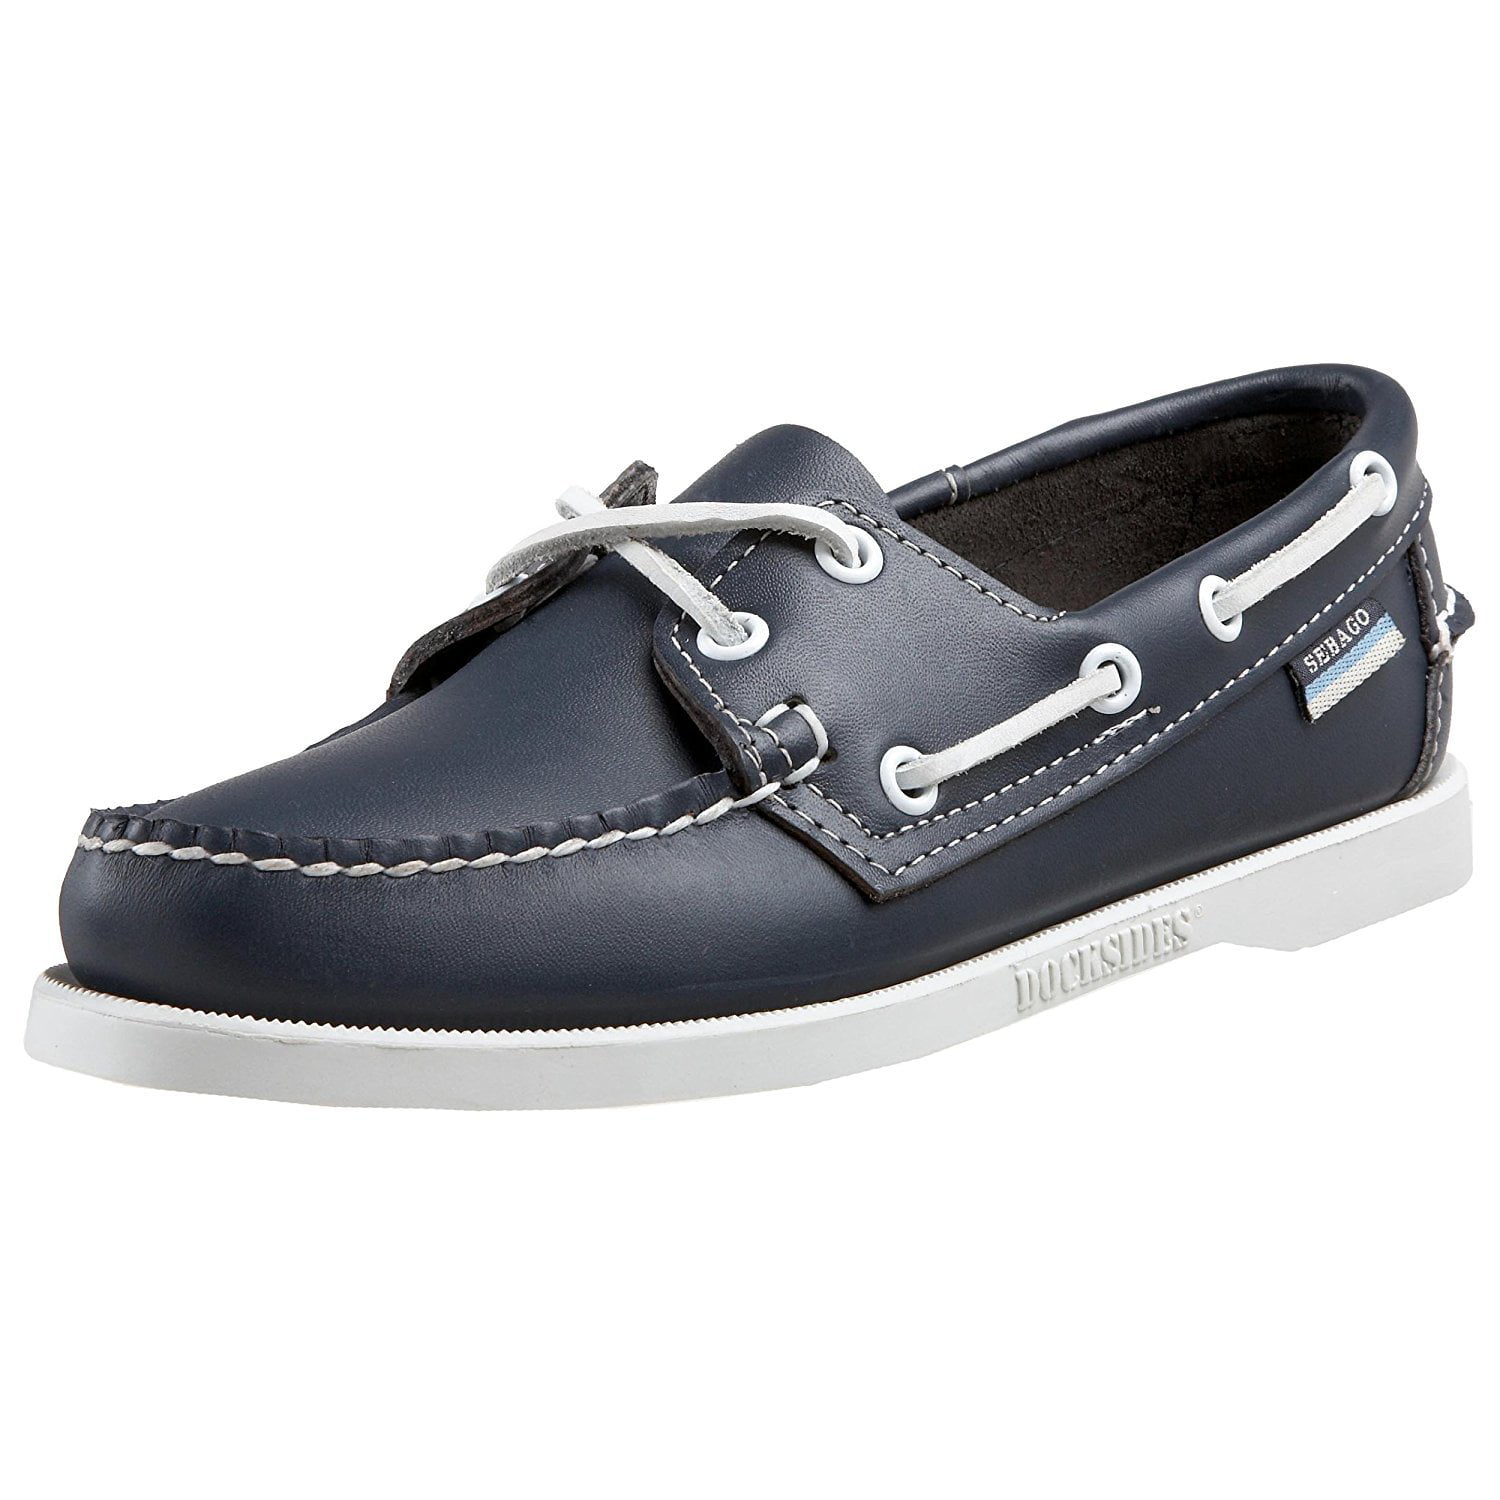 Female boat shoes